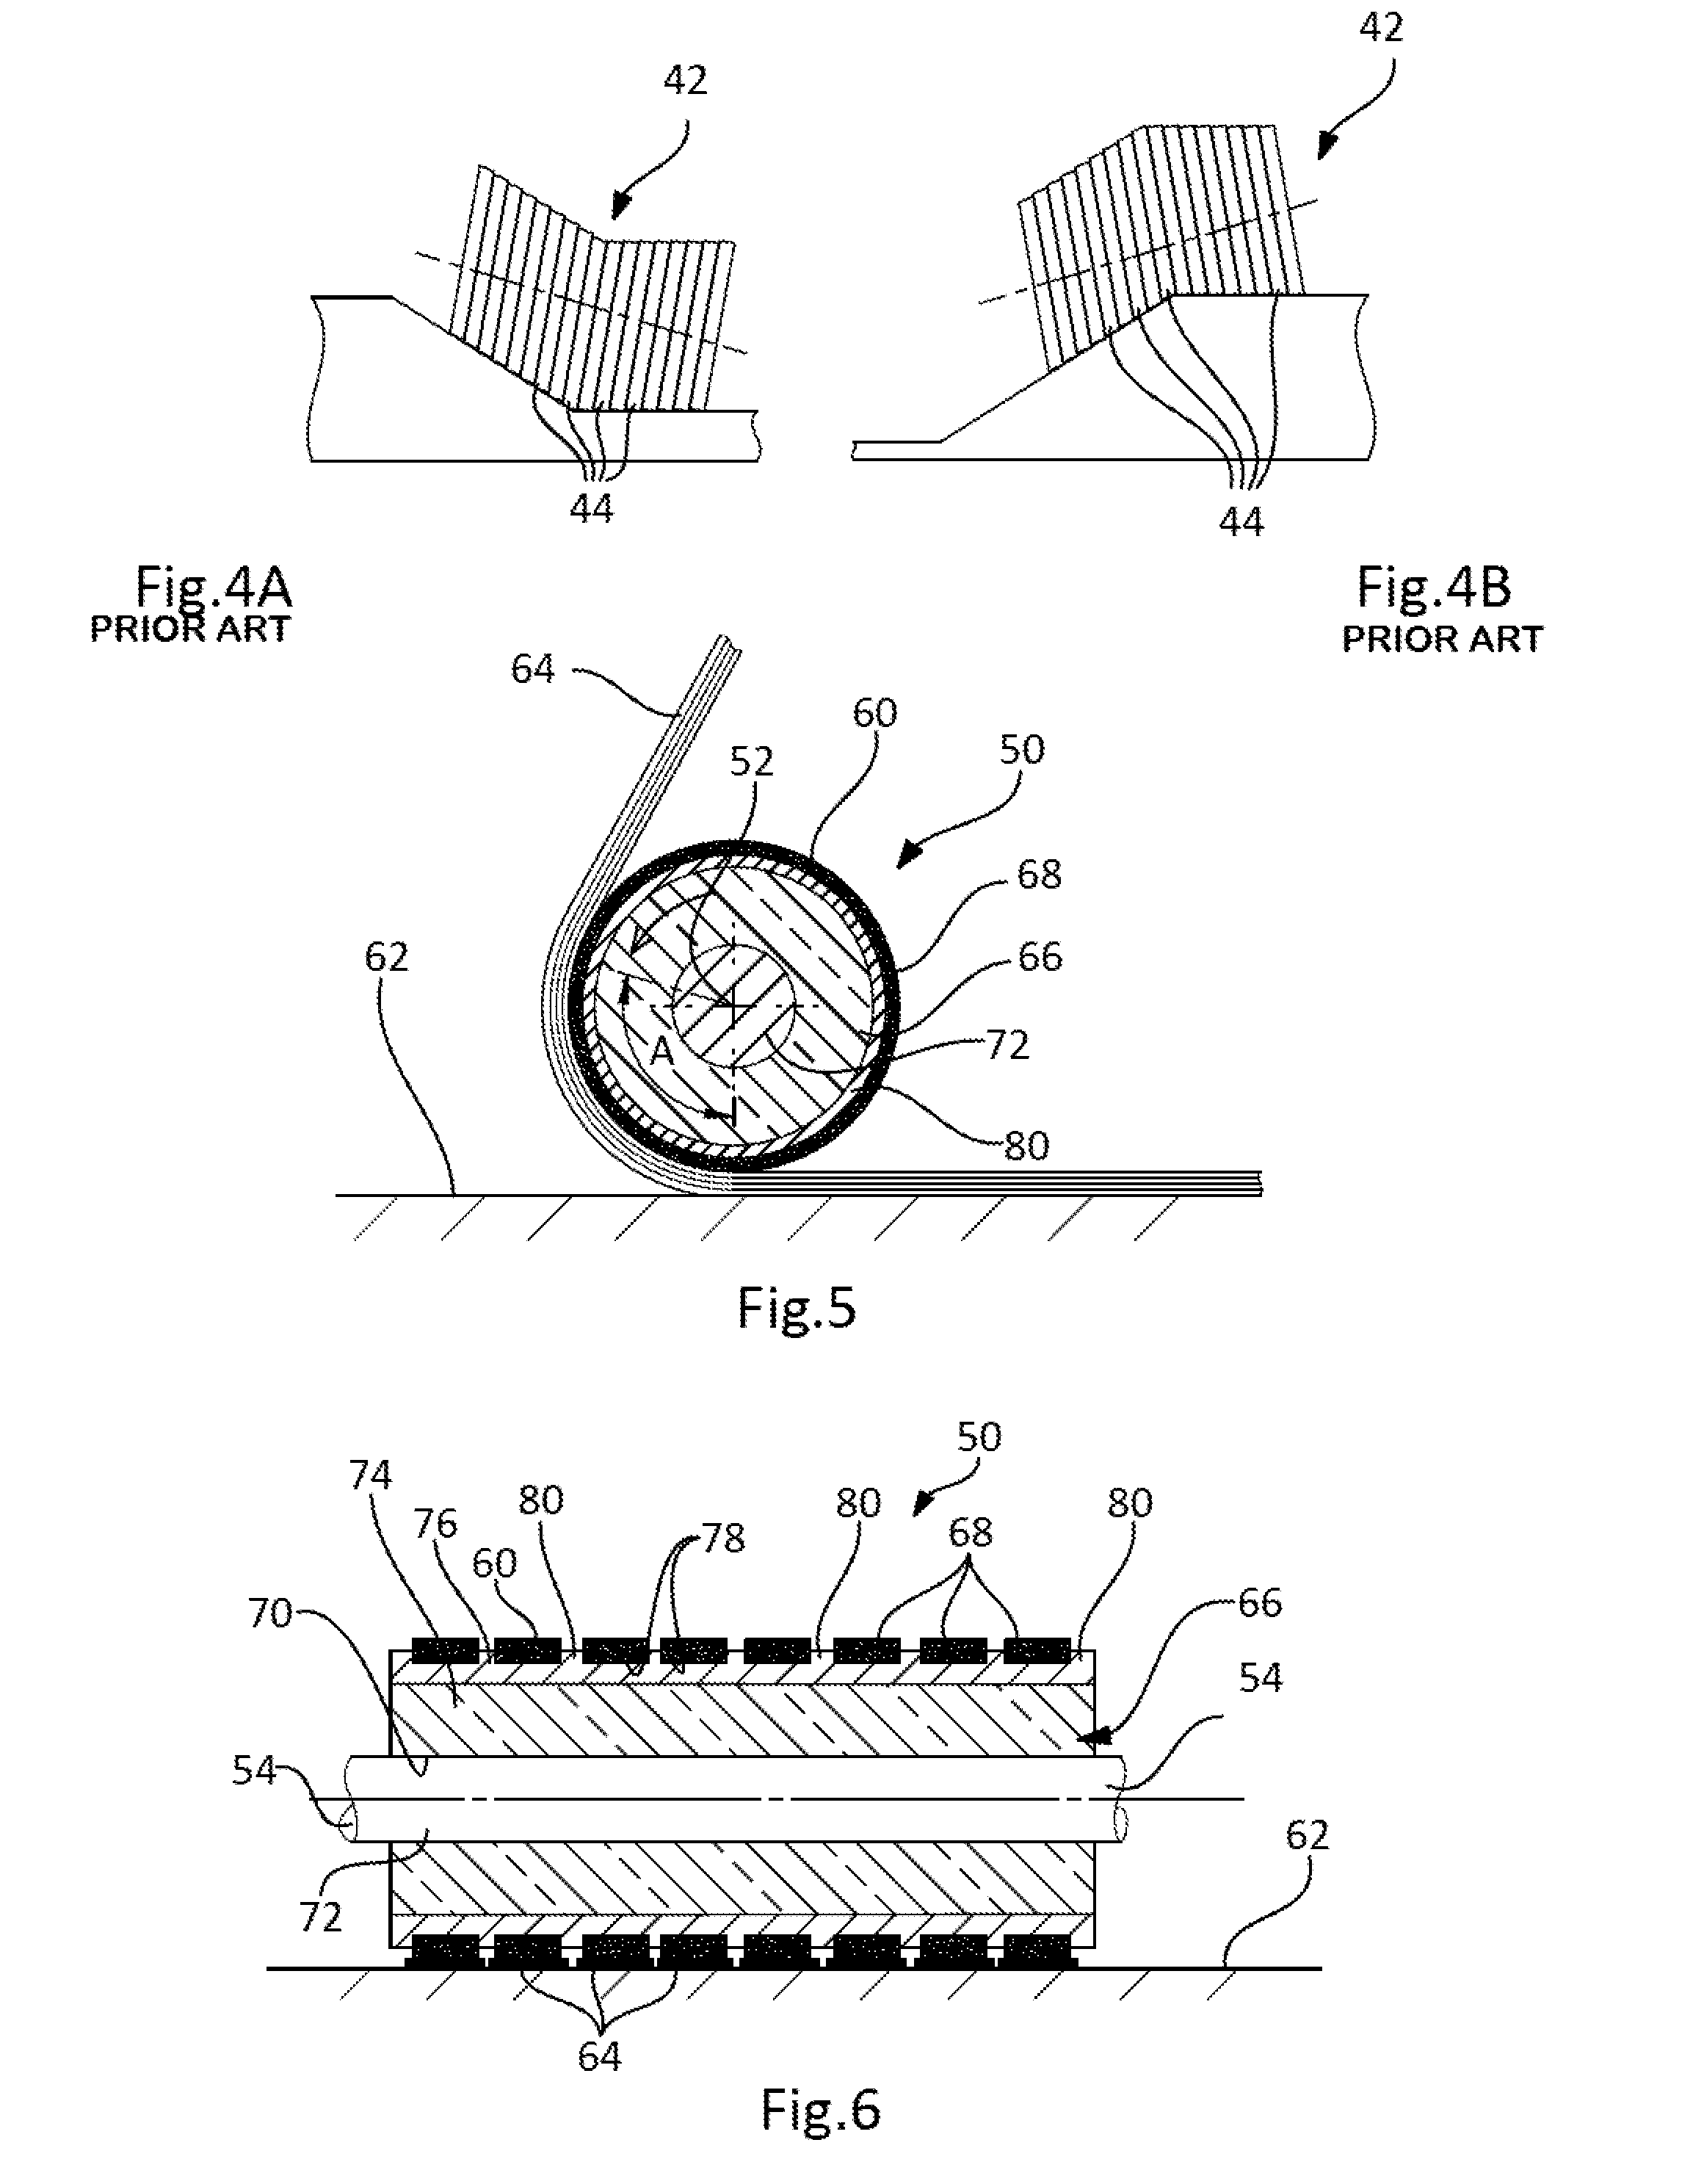 Fibre laying machine comprising a roller with pivoting rings